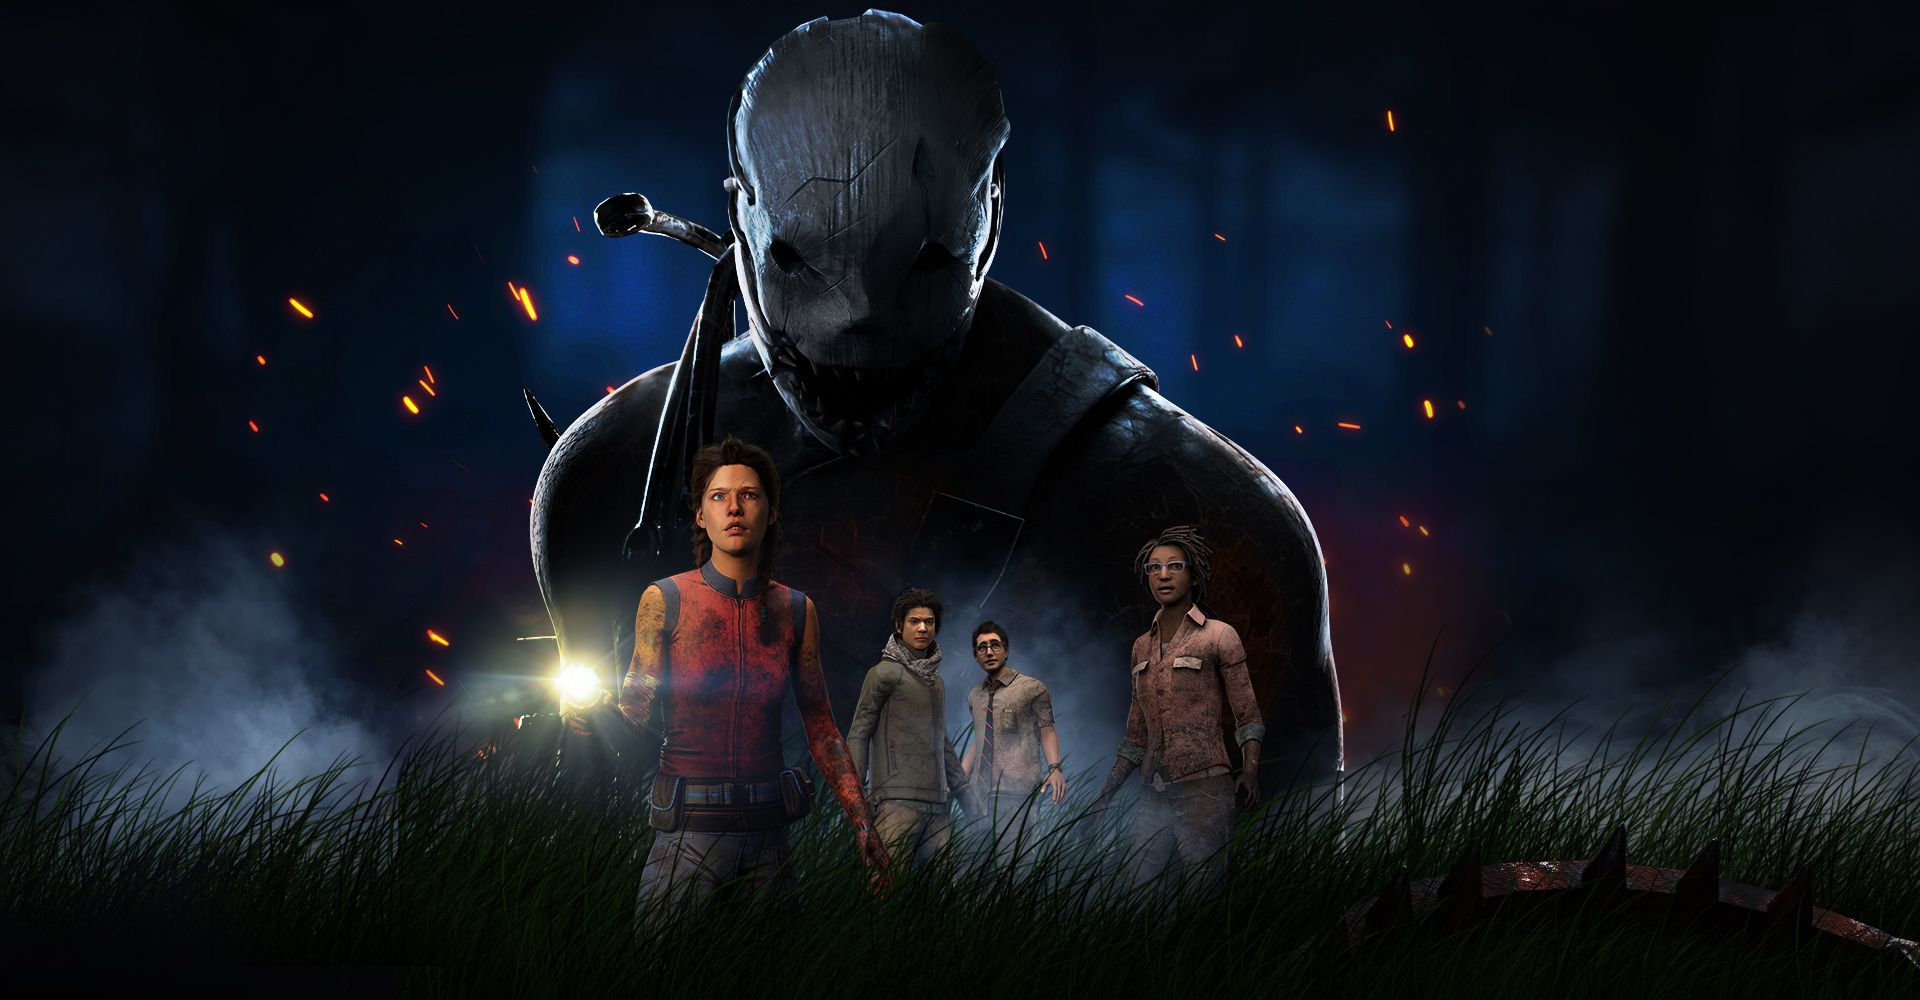 Why I Love Dead by Daylight